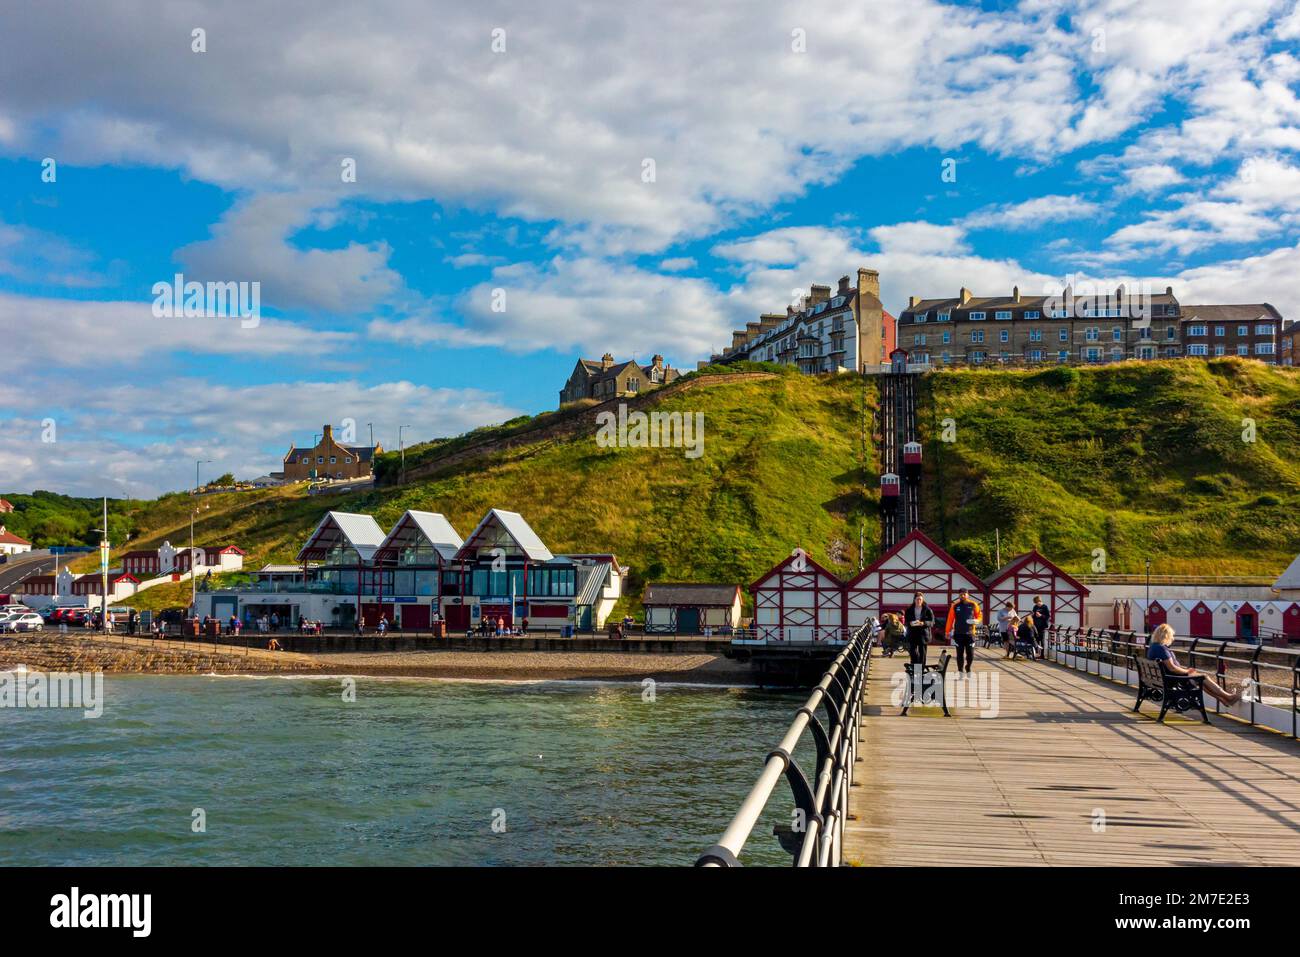 Saltburn Pier in Saltburn-by-the-Sea near Redcar in NorthYorkshire England UK built in 1869 by John Anderson now the last remaining pier in Yorkshire. Stock Photo